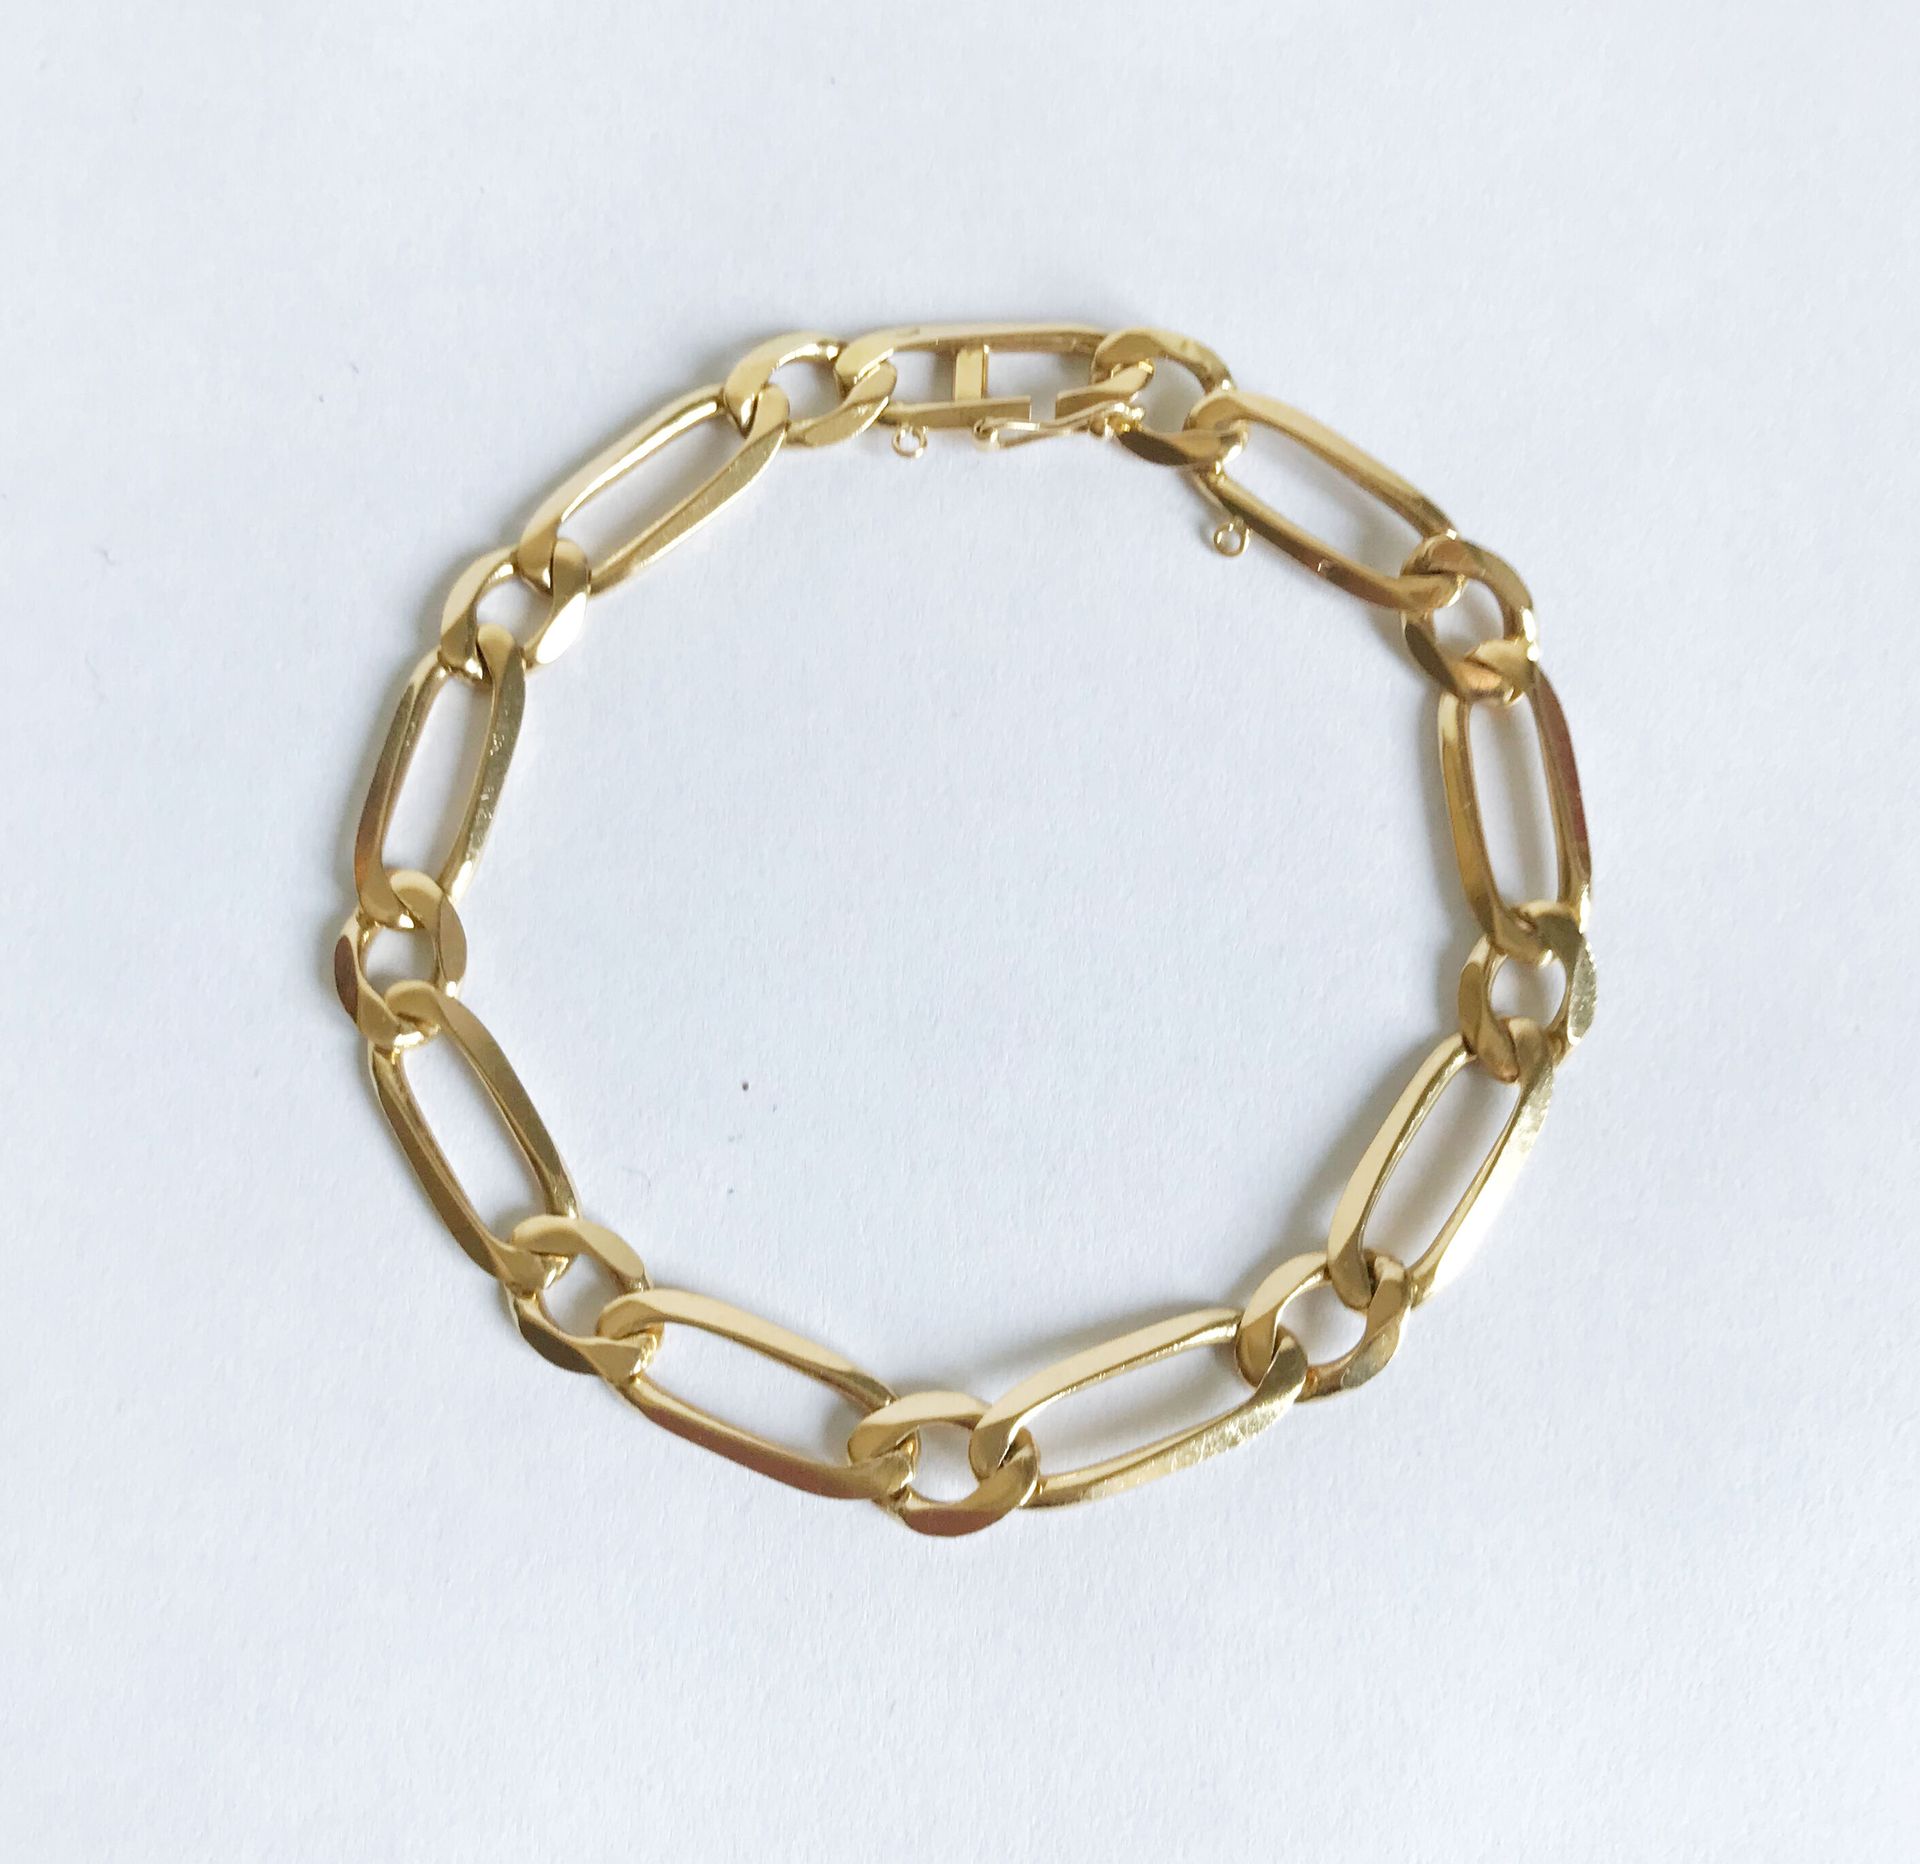 Null Bracelet in yellow gold (750th) with horse links
weight : 13 g